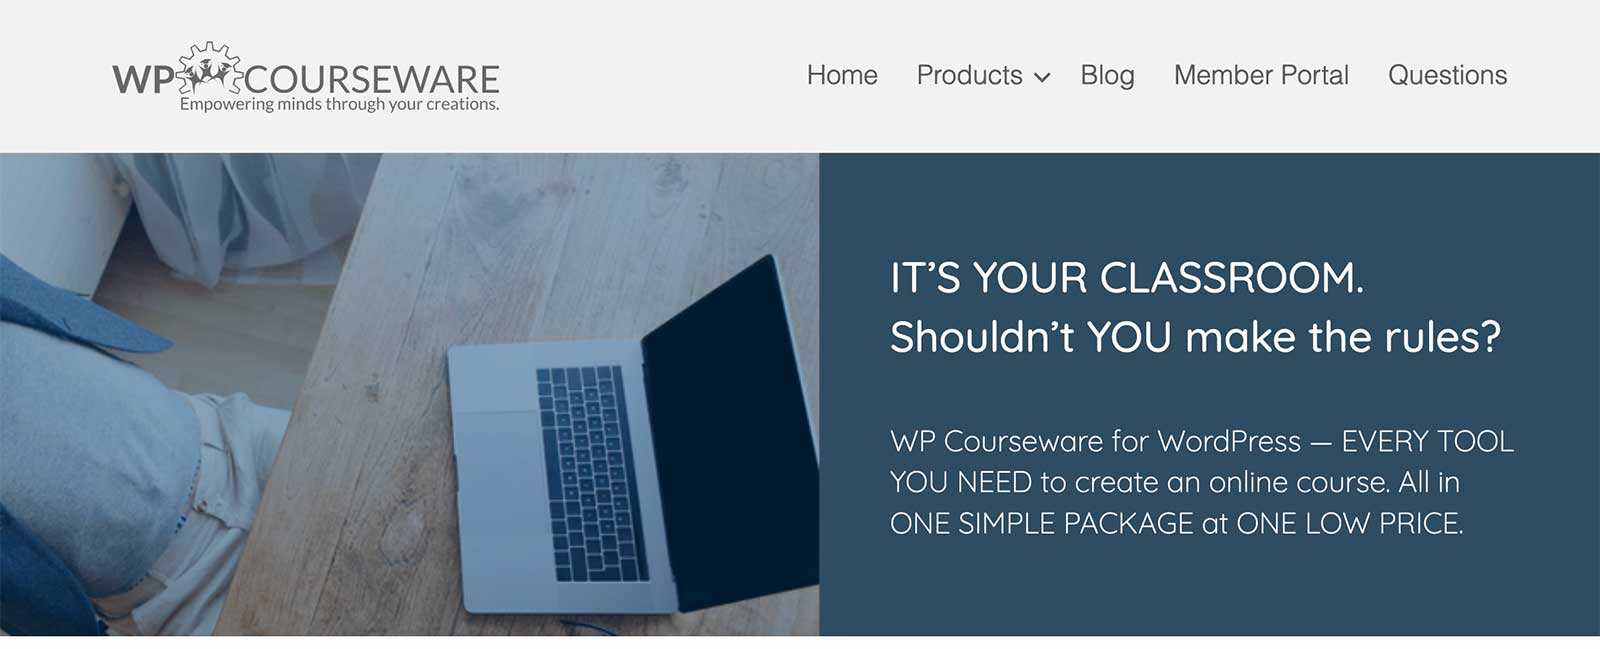 wp-courseware-review